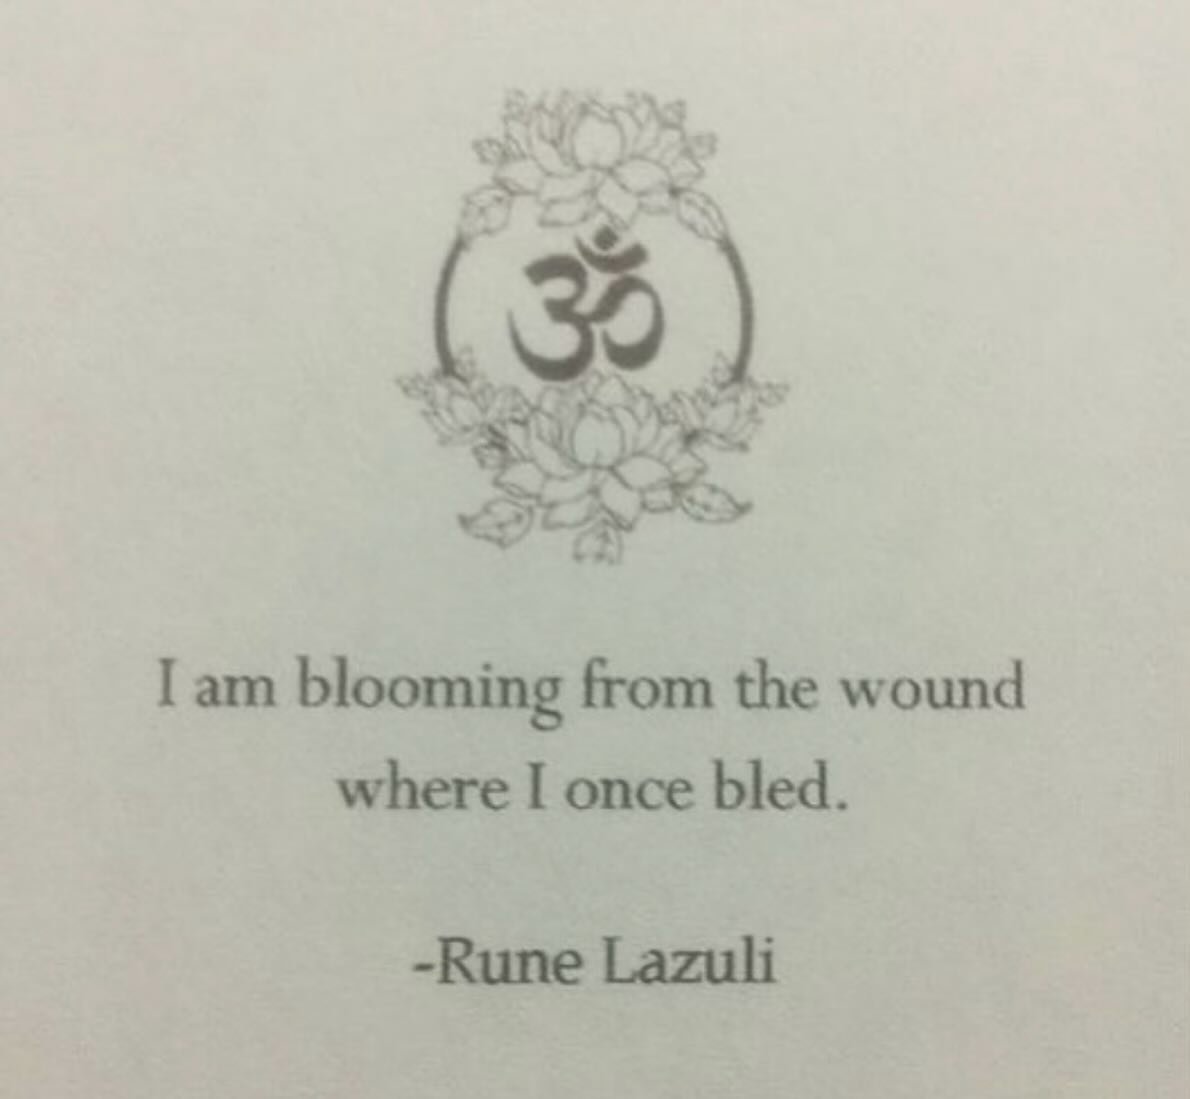 blooming from the wound where I once bled🪽

this sentence hits home. as the wound where I once bled was very very v&eacute;ry bloody. and painful. I was diagnosed with an *incurable &amp; chronic* gut dis-ease when I was 17. 

I went on a seemingly 